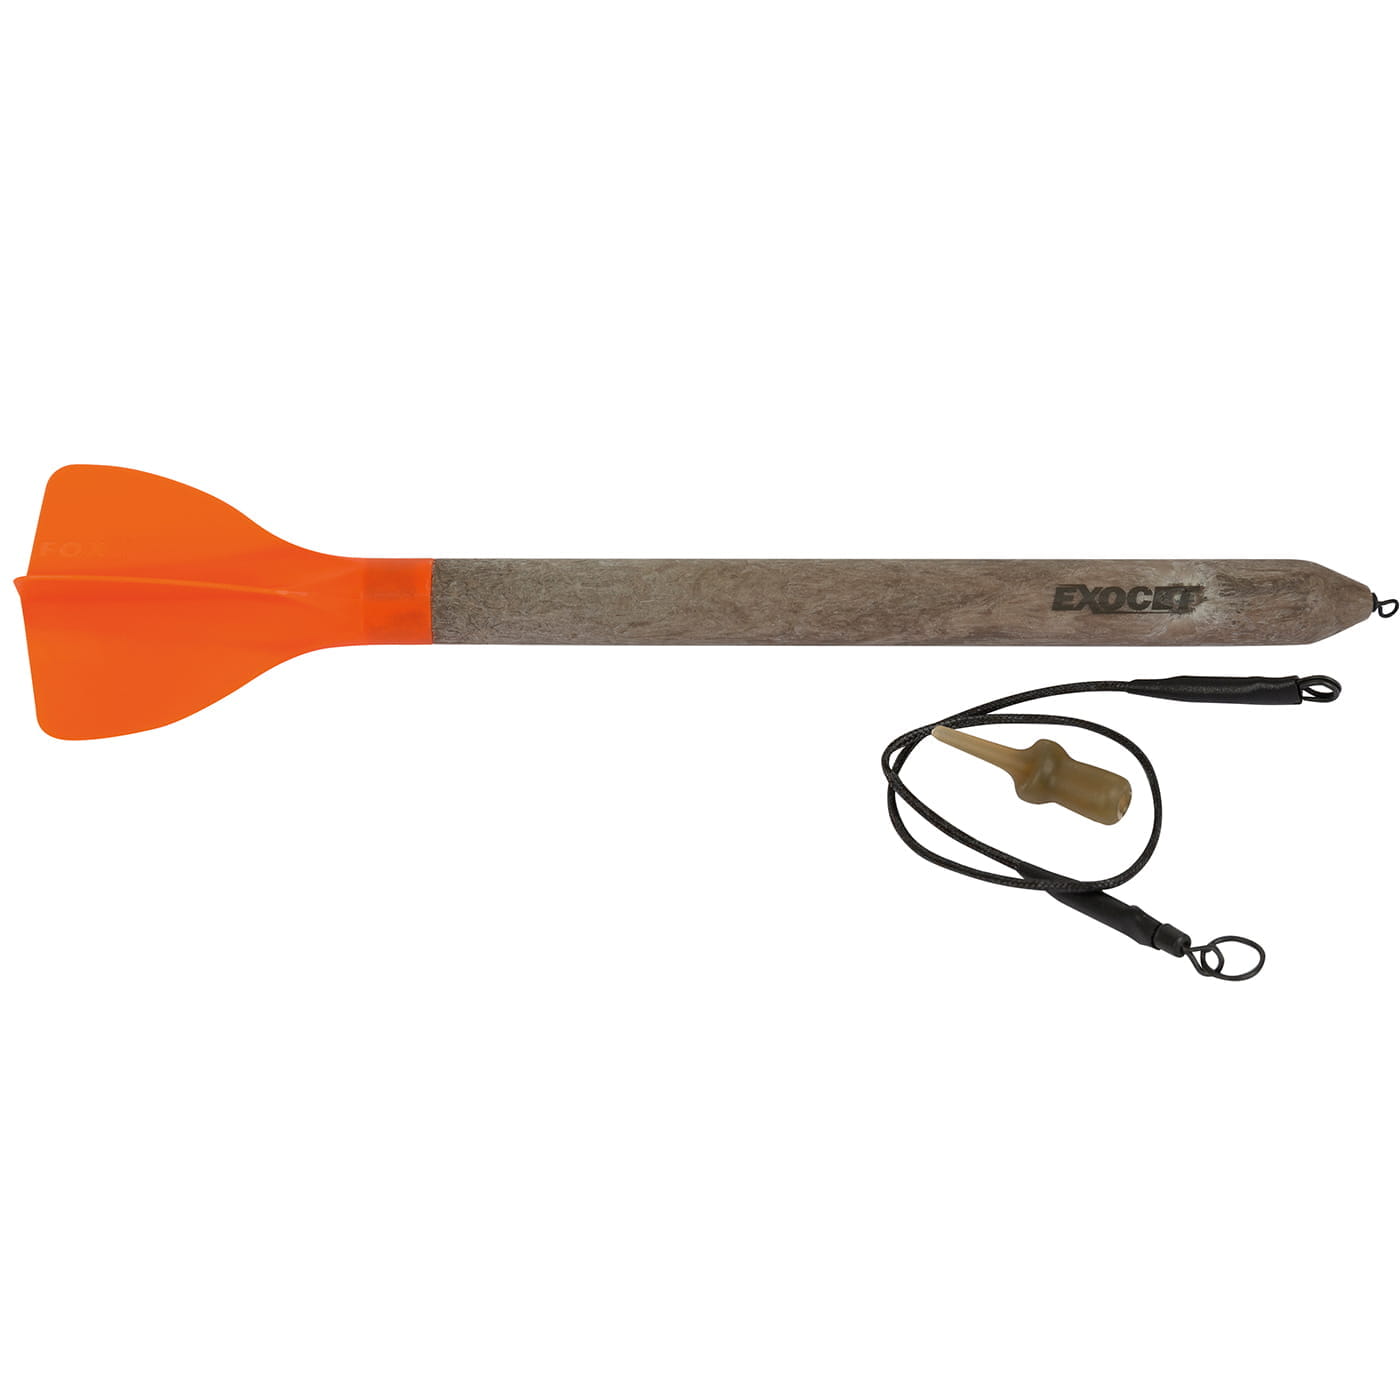 Fox Exocet Marker Float Kit Incl Boom Section - CAC760 - Carp Fishing NEW  5056212128266